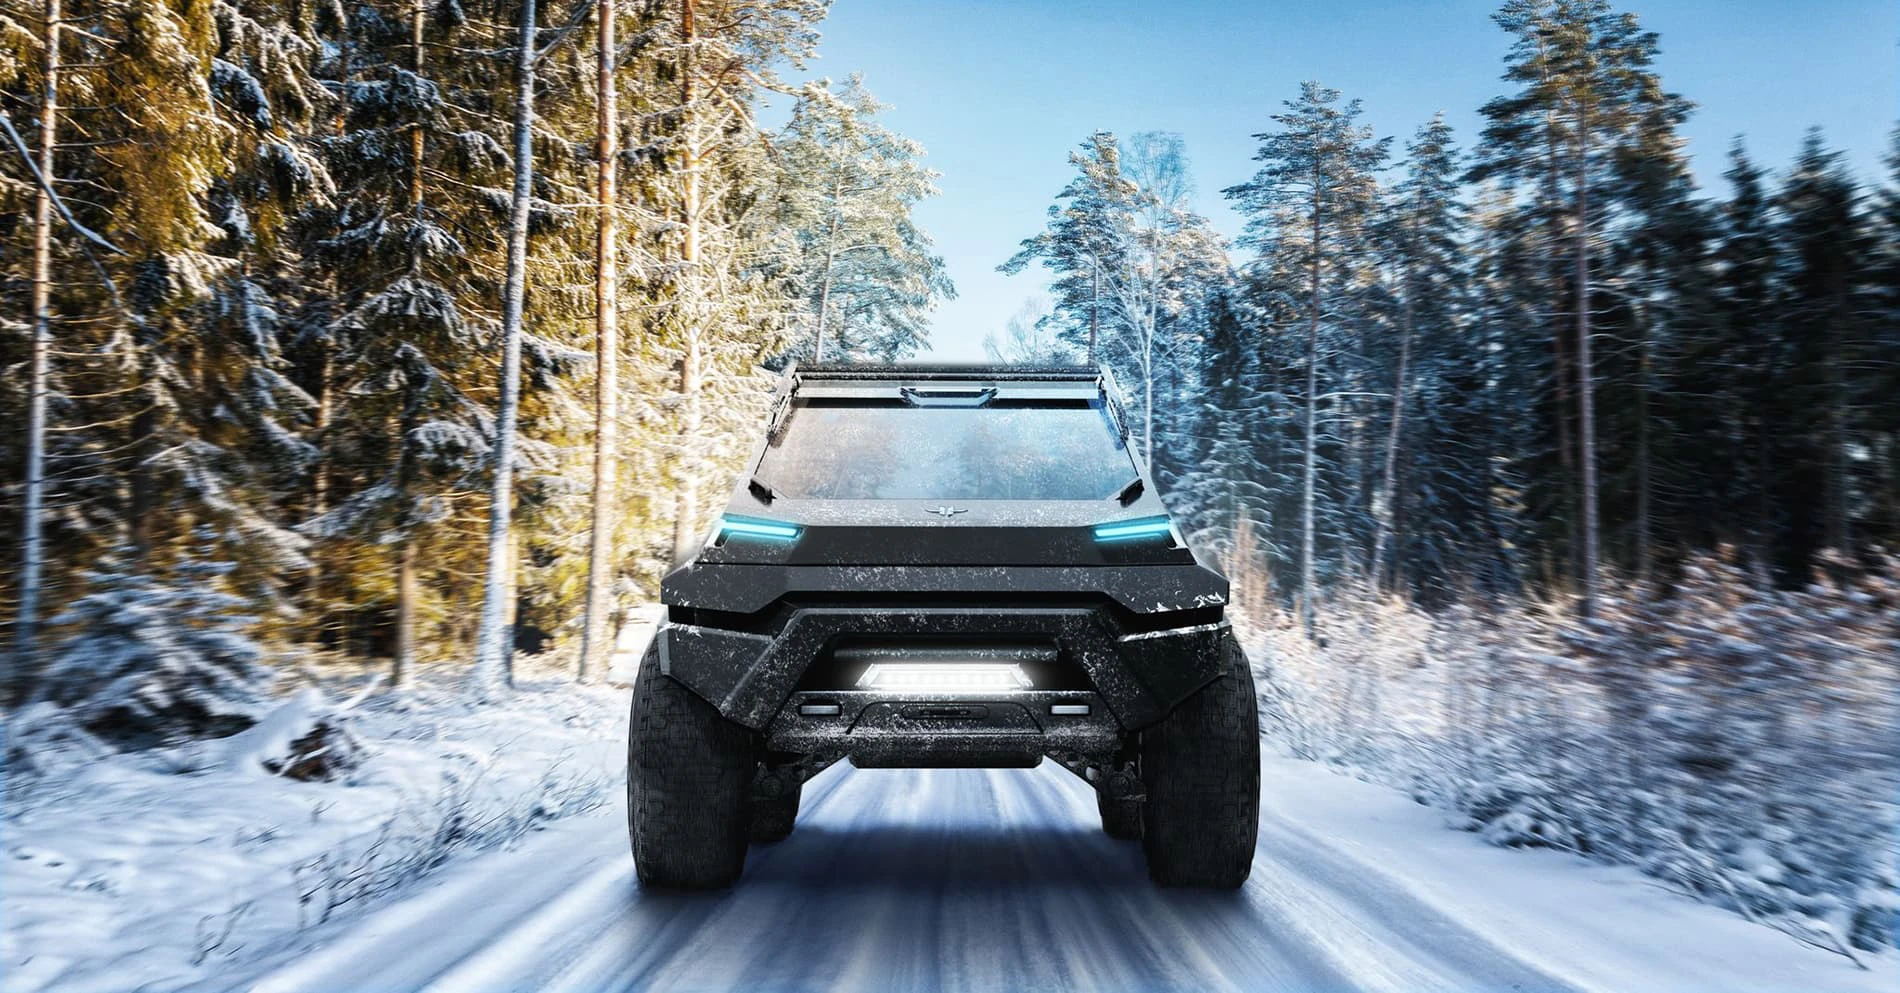 Wolfgang L.A. 'Thundertruck' Off-Road Electric Pickup